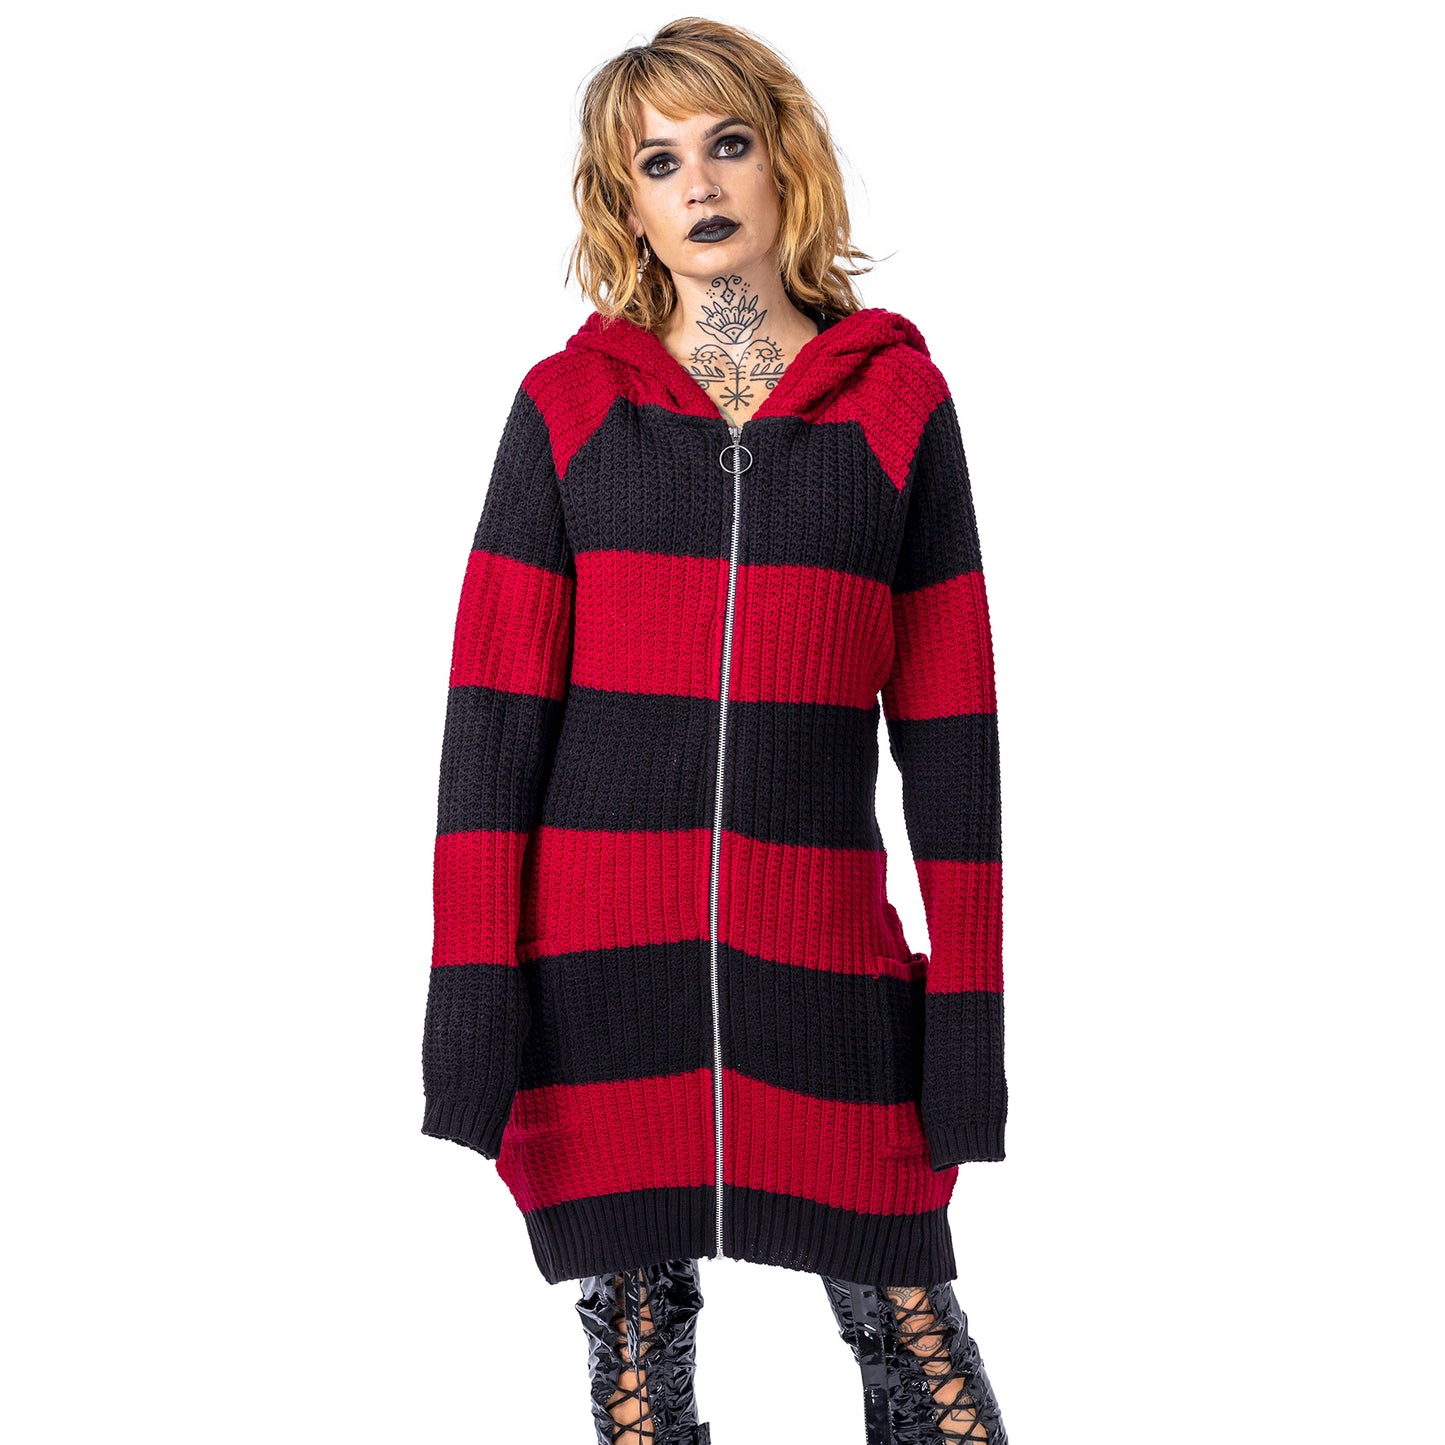 Poizen Industries Esther Cardigan - Red & Black - Kate's Clothing